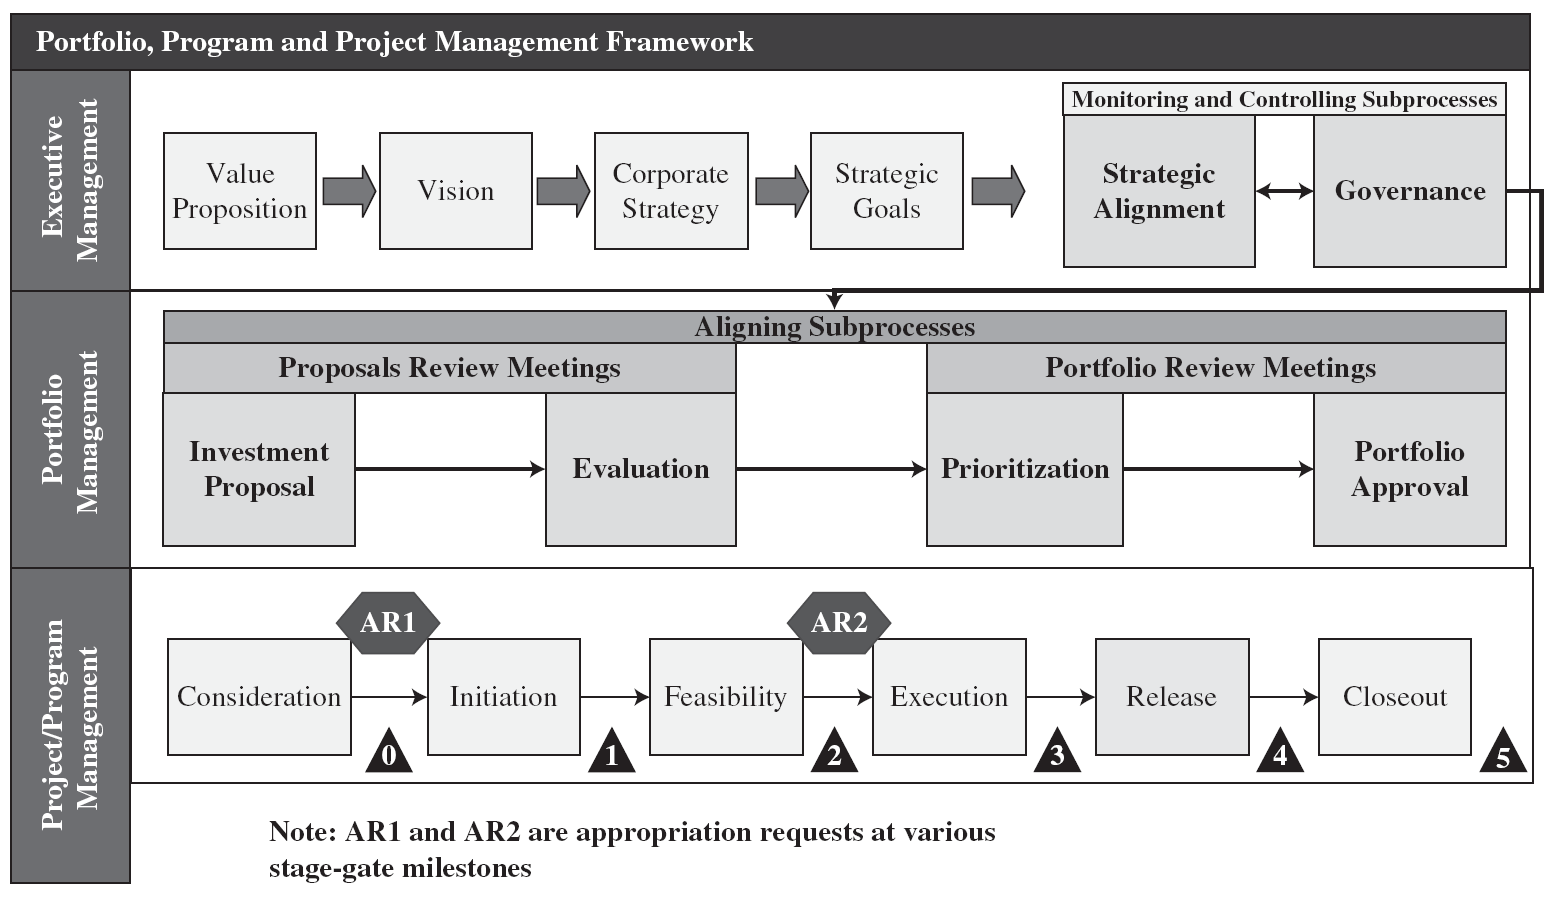 Flowchart of the Portfolio, Program, and Project Management Framework.  It starts with Executive Management determining the vision and goals of the organization. Next is the Portfolio Management process with reviewing and prioritizing proposals. Finally is the Project/Program Management process with initiating and executing the individual programs/projects with key milestones.